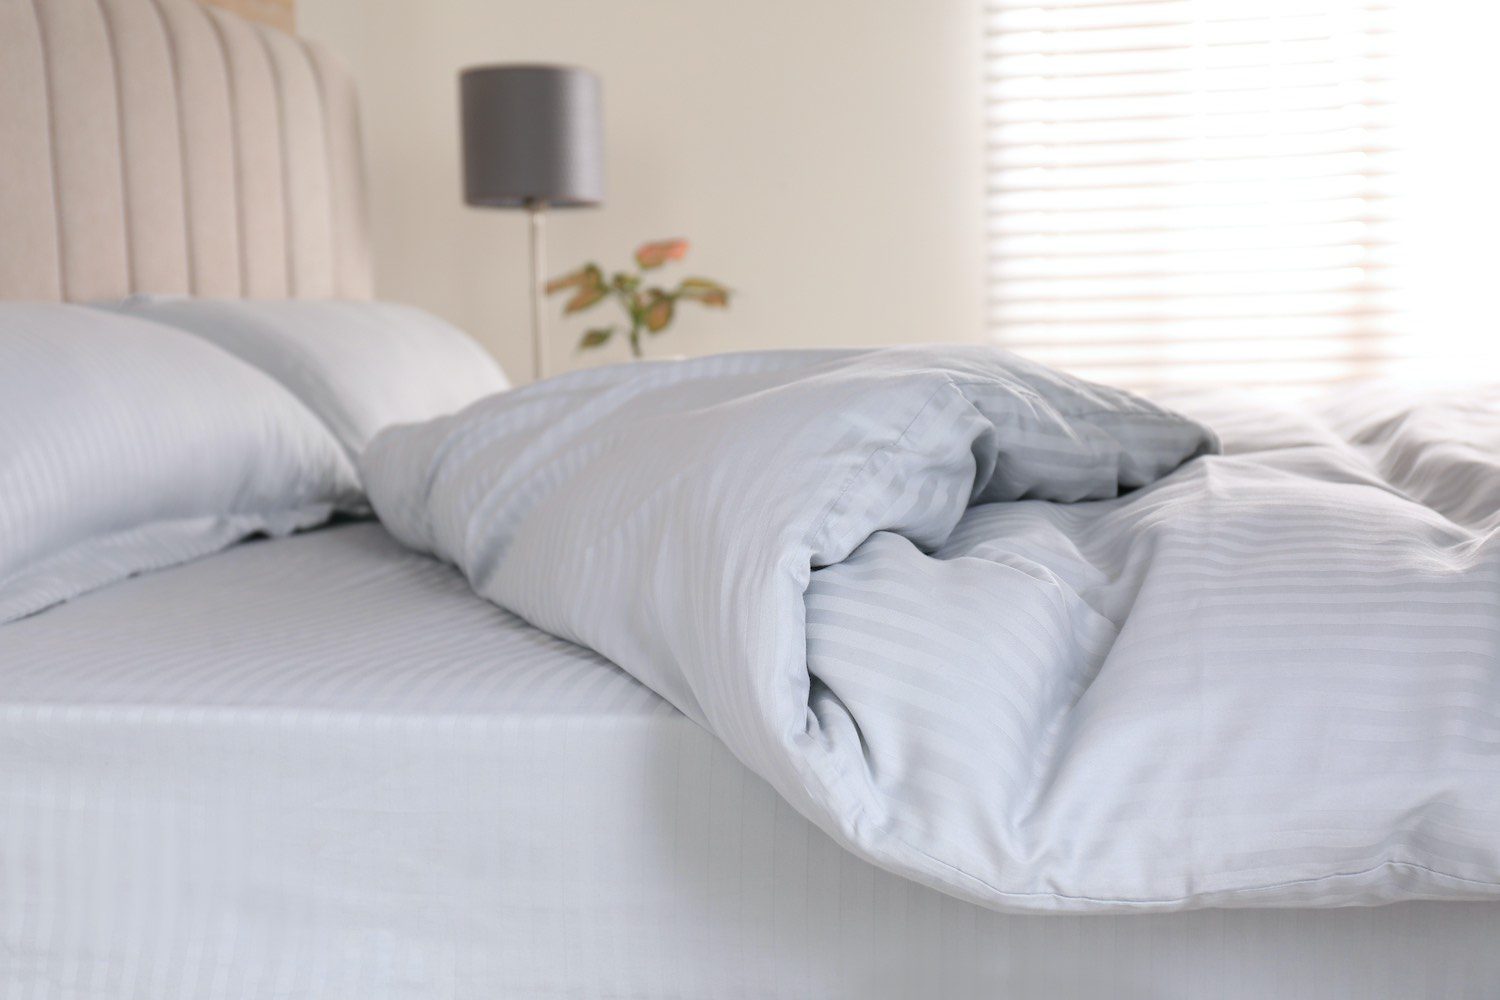 What Is A Duvet Cover Sleep Foundation, How Do Duvet Covers Work